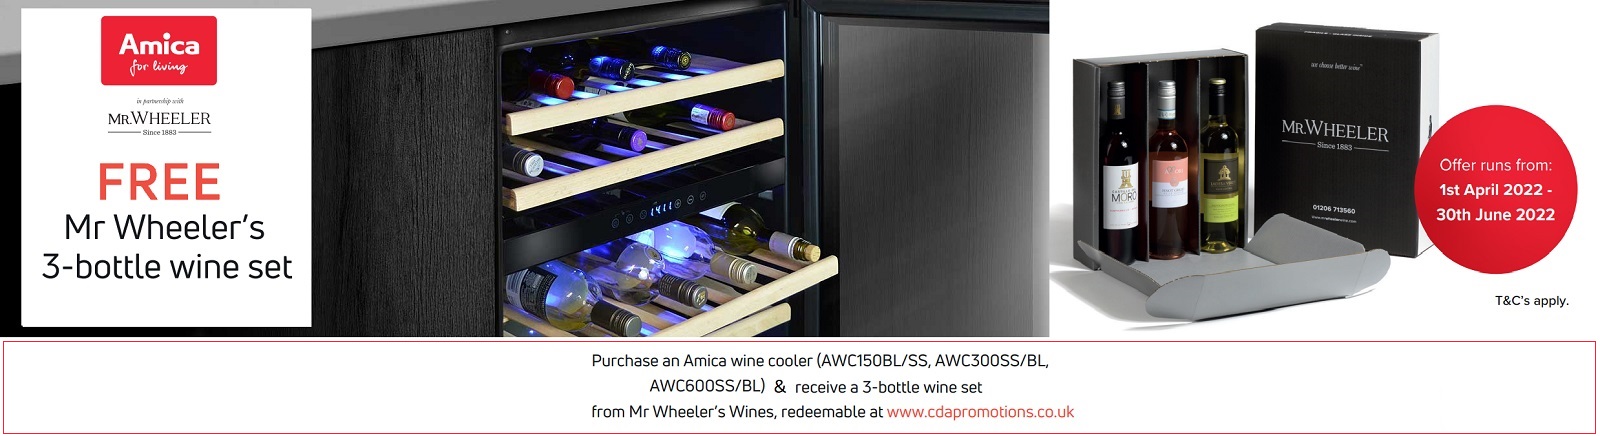 Amica Wine Cooler Promotion